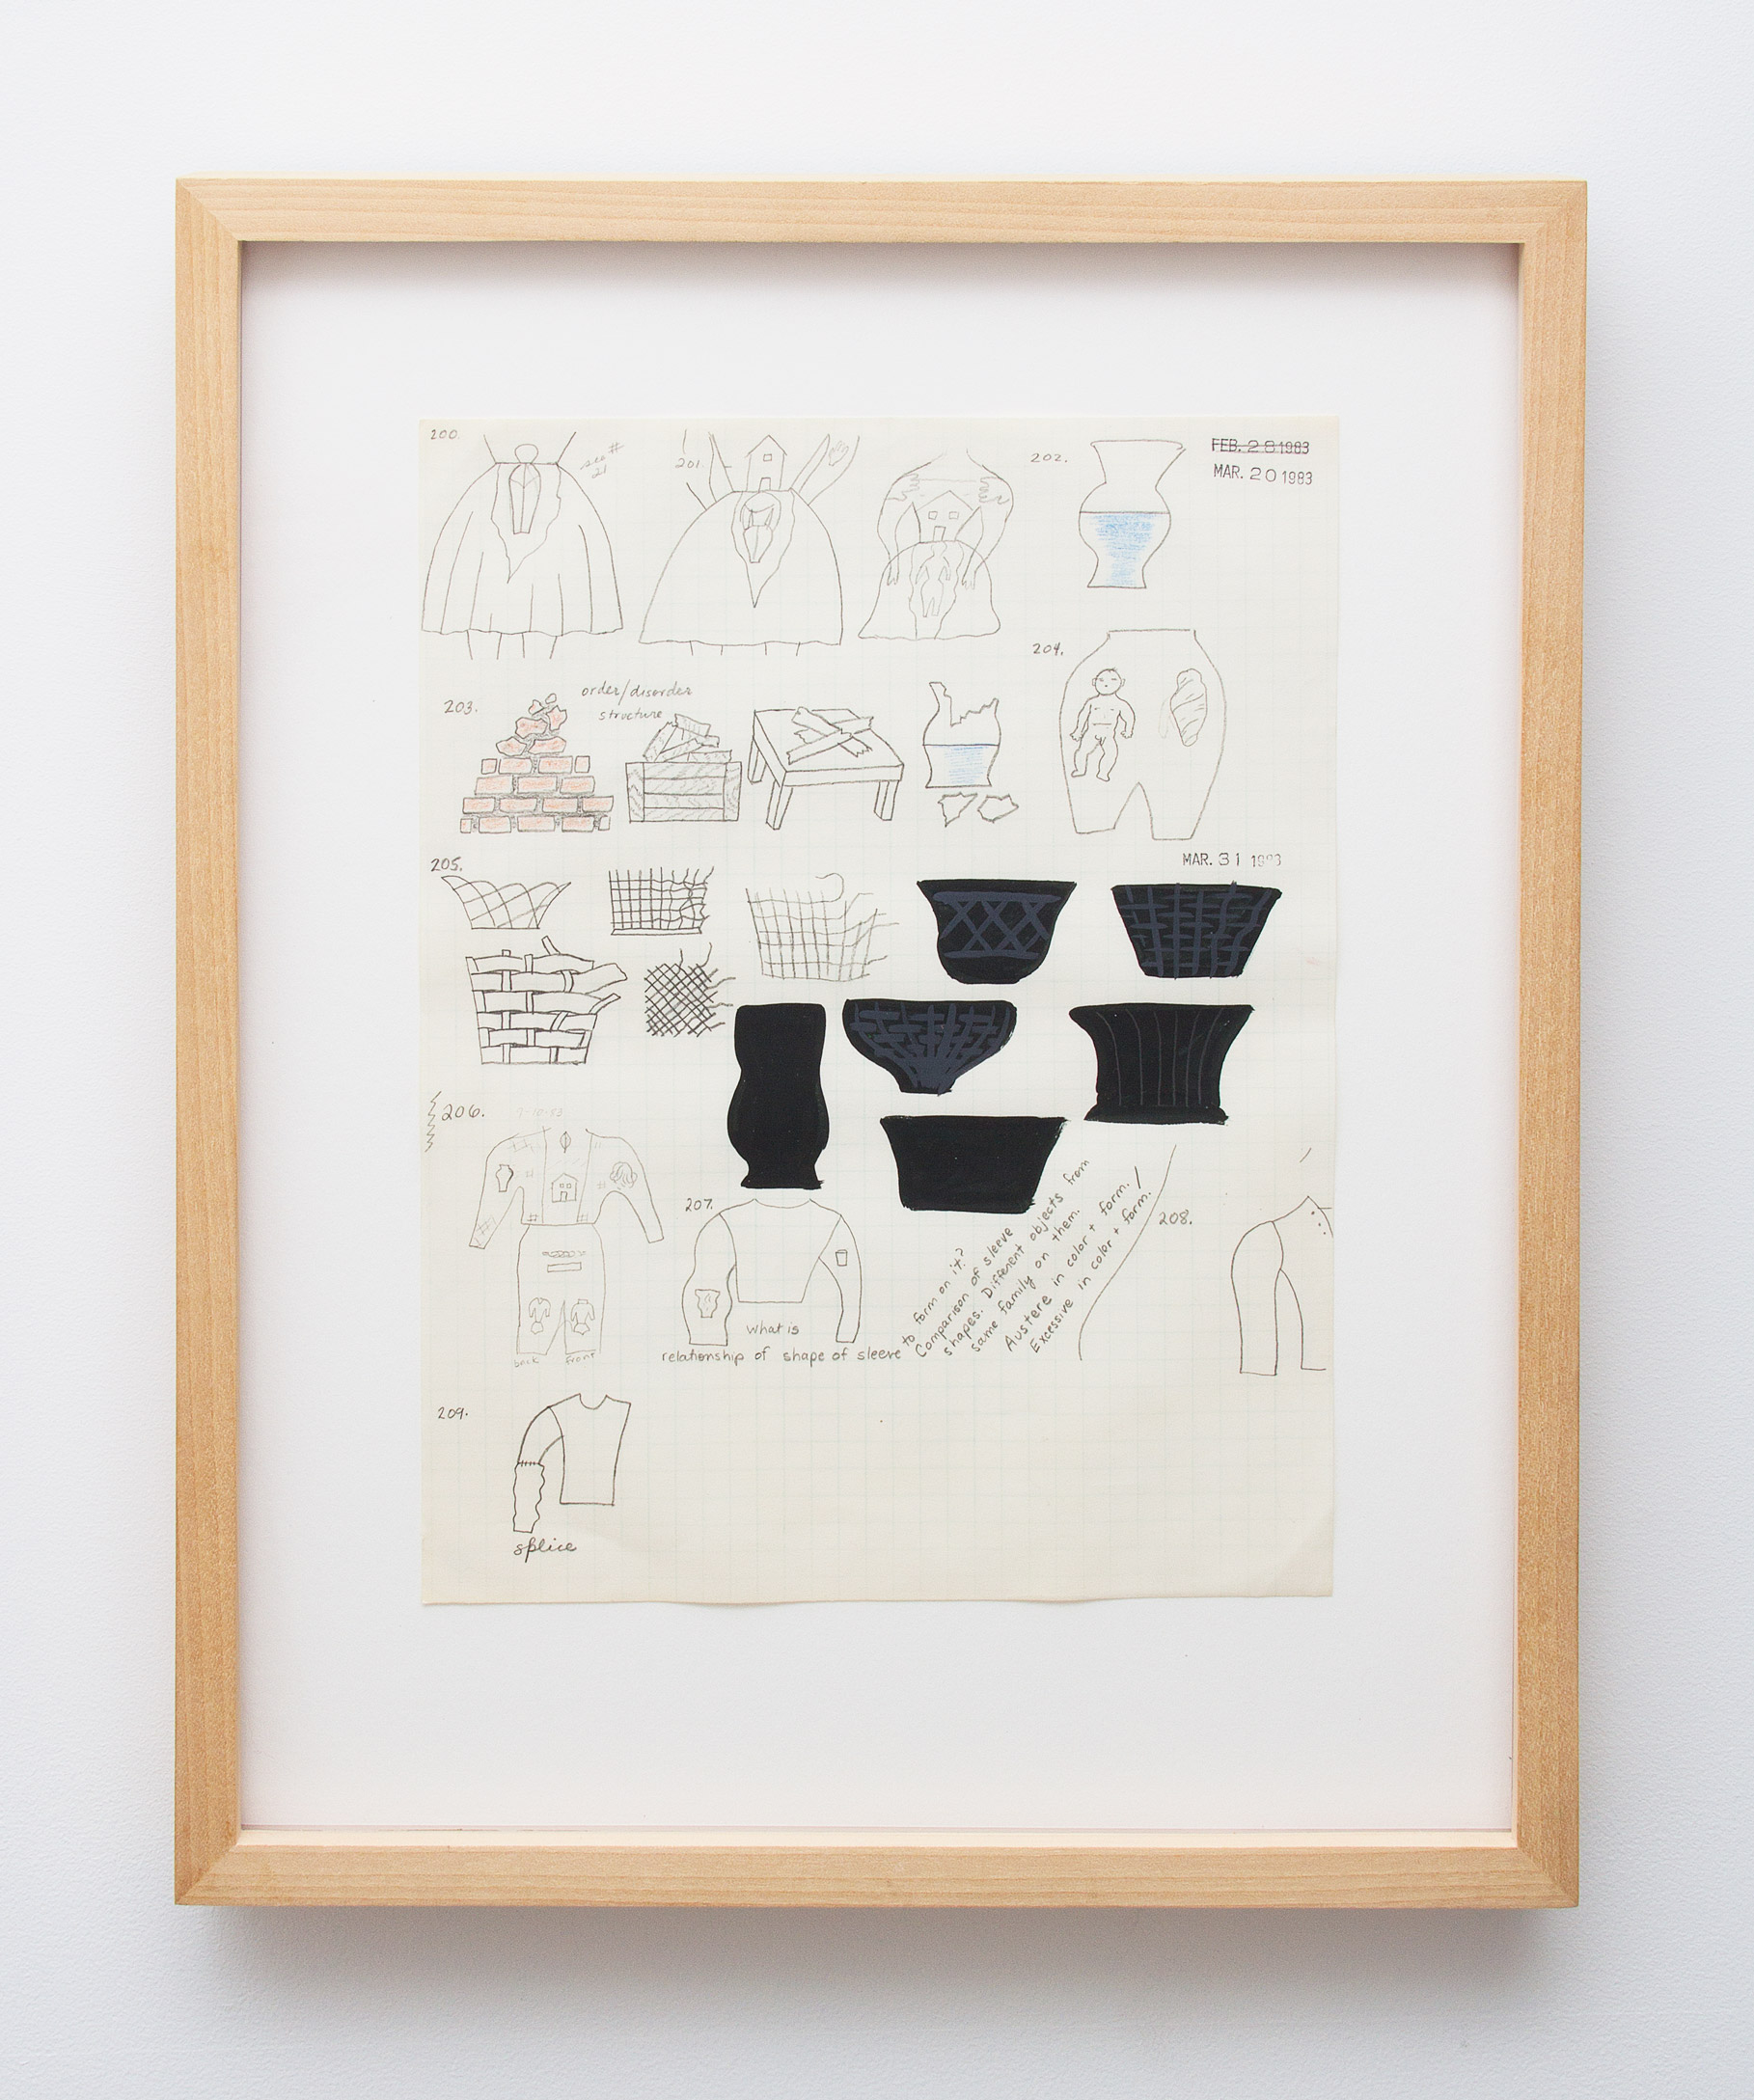 Christina Ramberg, Untitled, 1983, ink, graphite, and colored pencil on paper, 11h x 8.5w in.